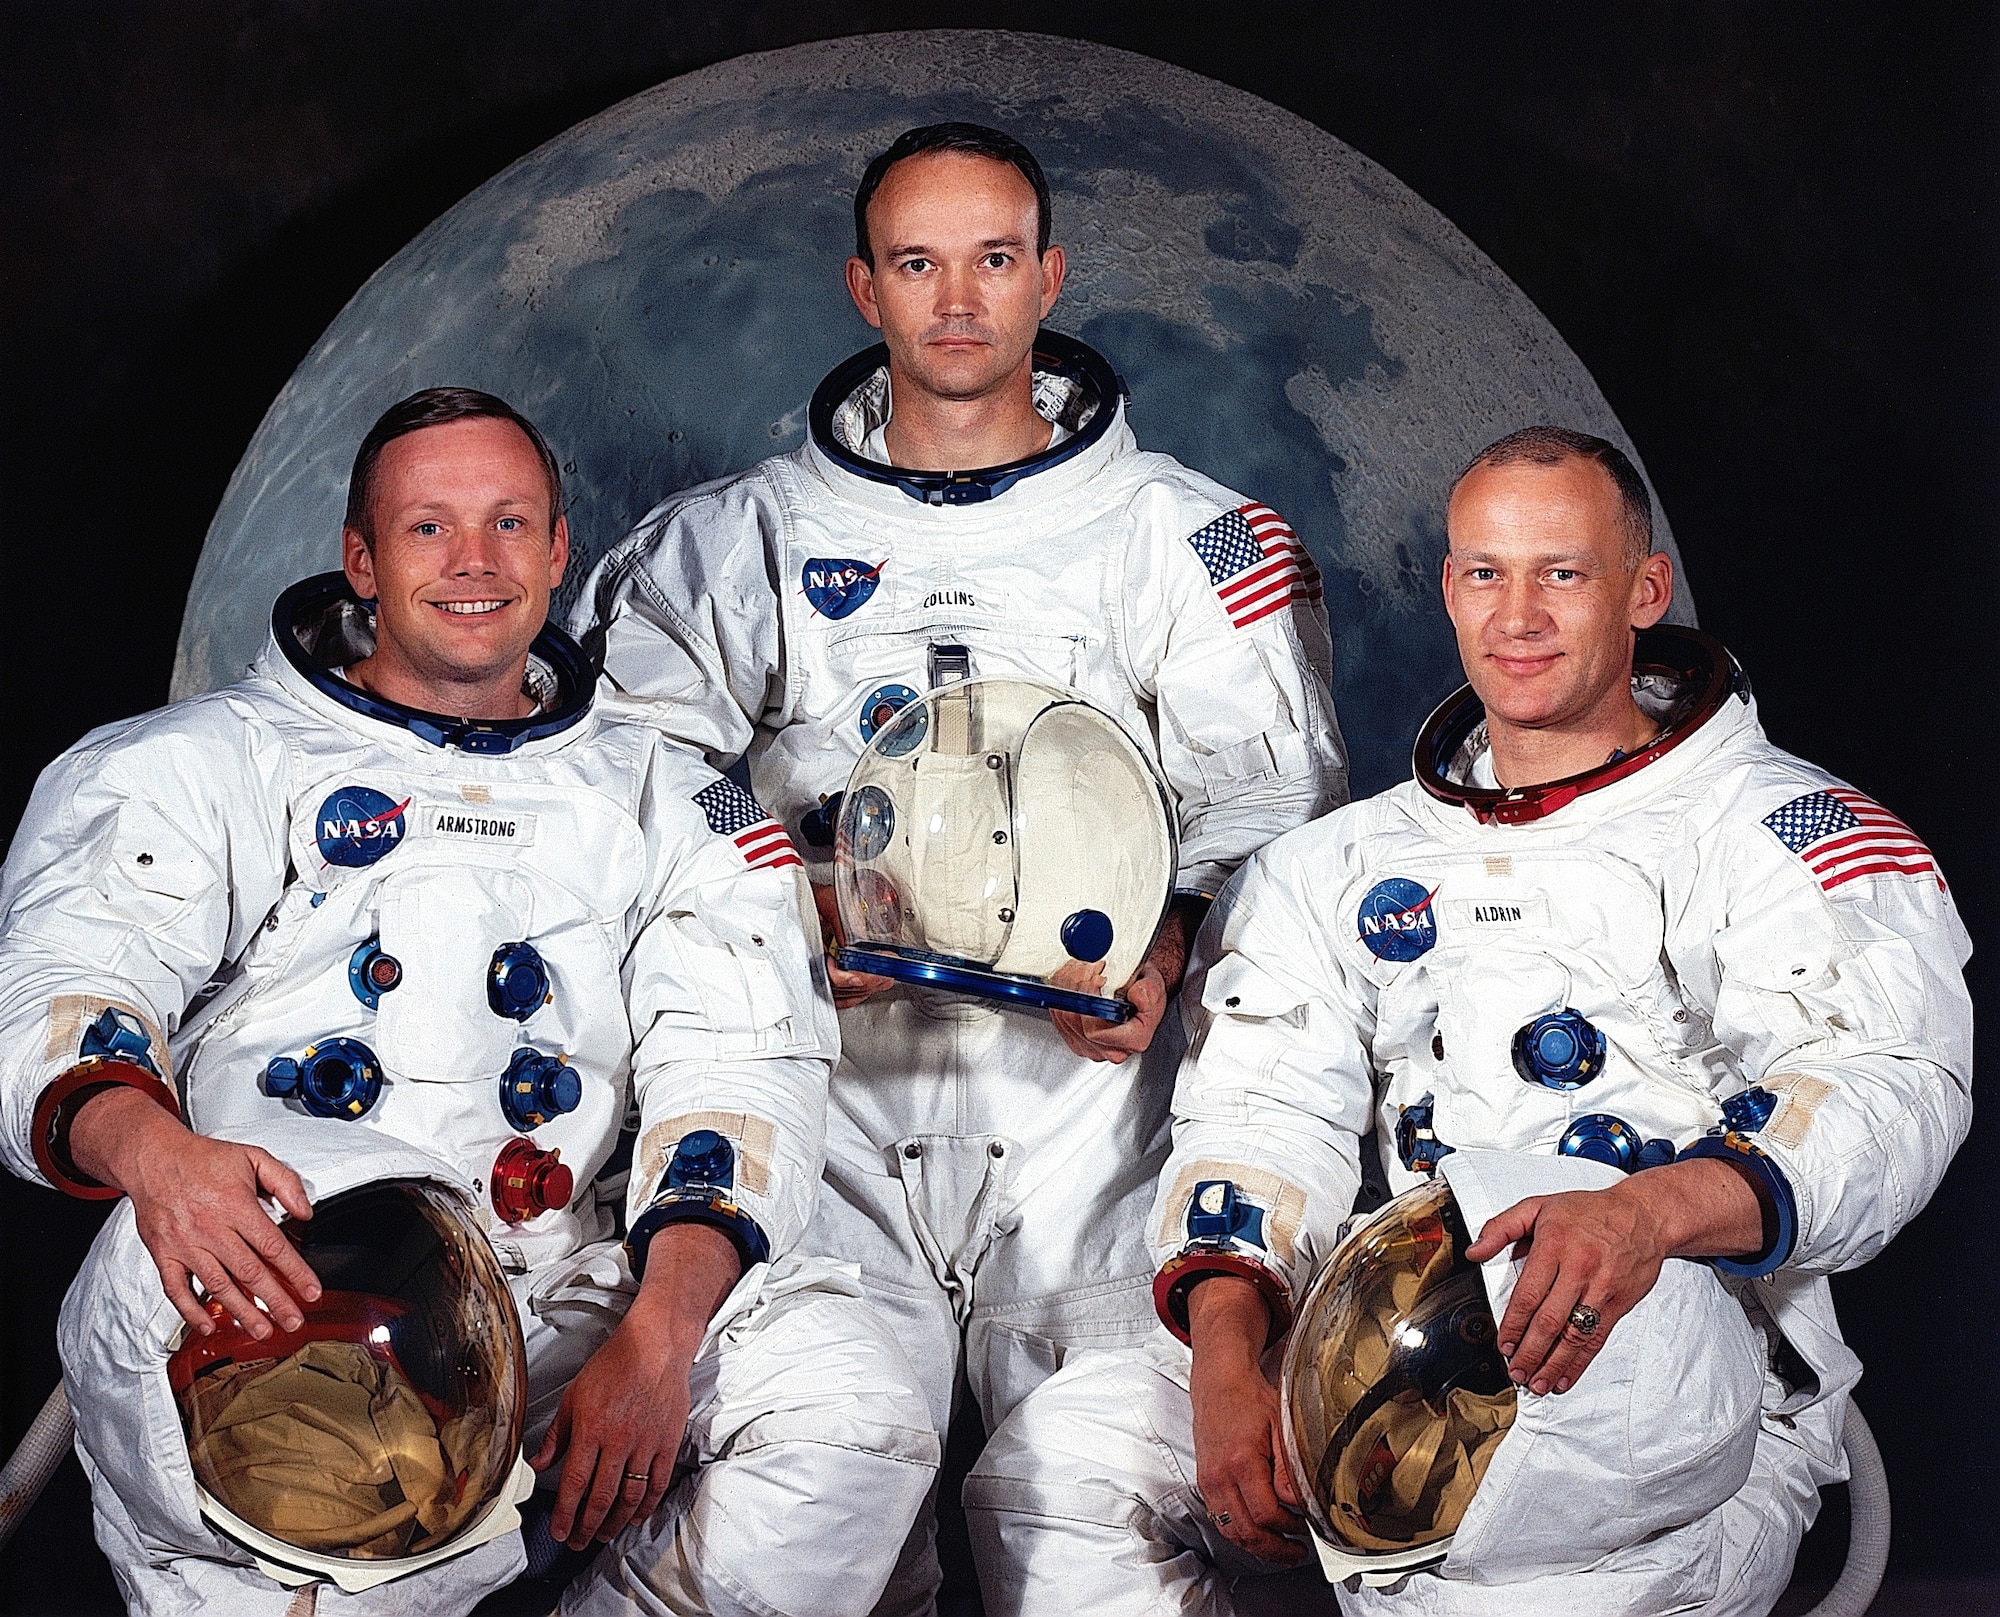 Apollo 11 Command Module Pilot and USAF Col. (later Maj. Gen.) Michael Collins (center) with Neil Armstrong (left) and USAF Col. Buzz Aldrin. (Contributed photo)